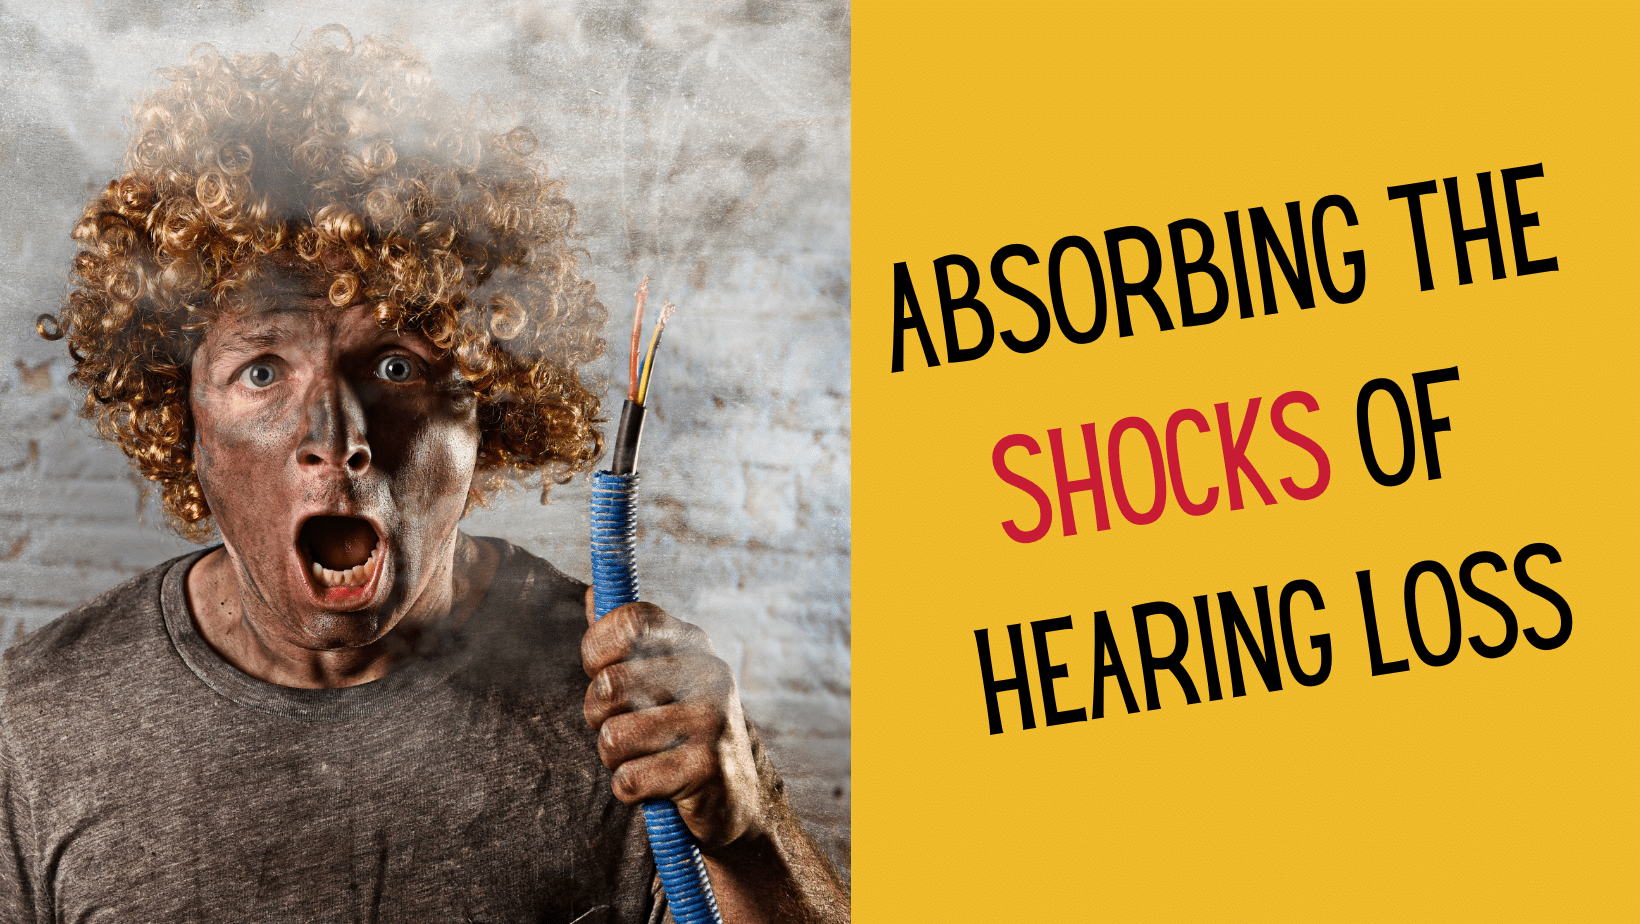 Featured image for “Absorbing the Shocks of Hearing Loss”